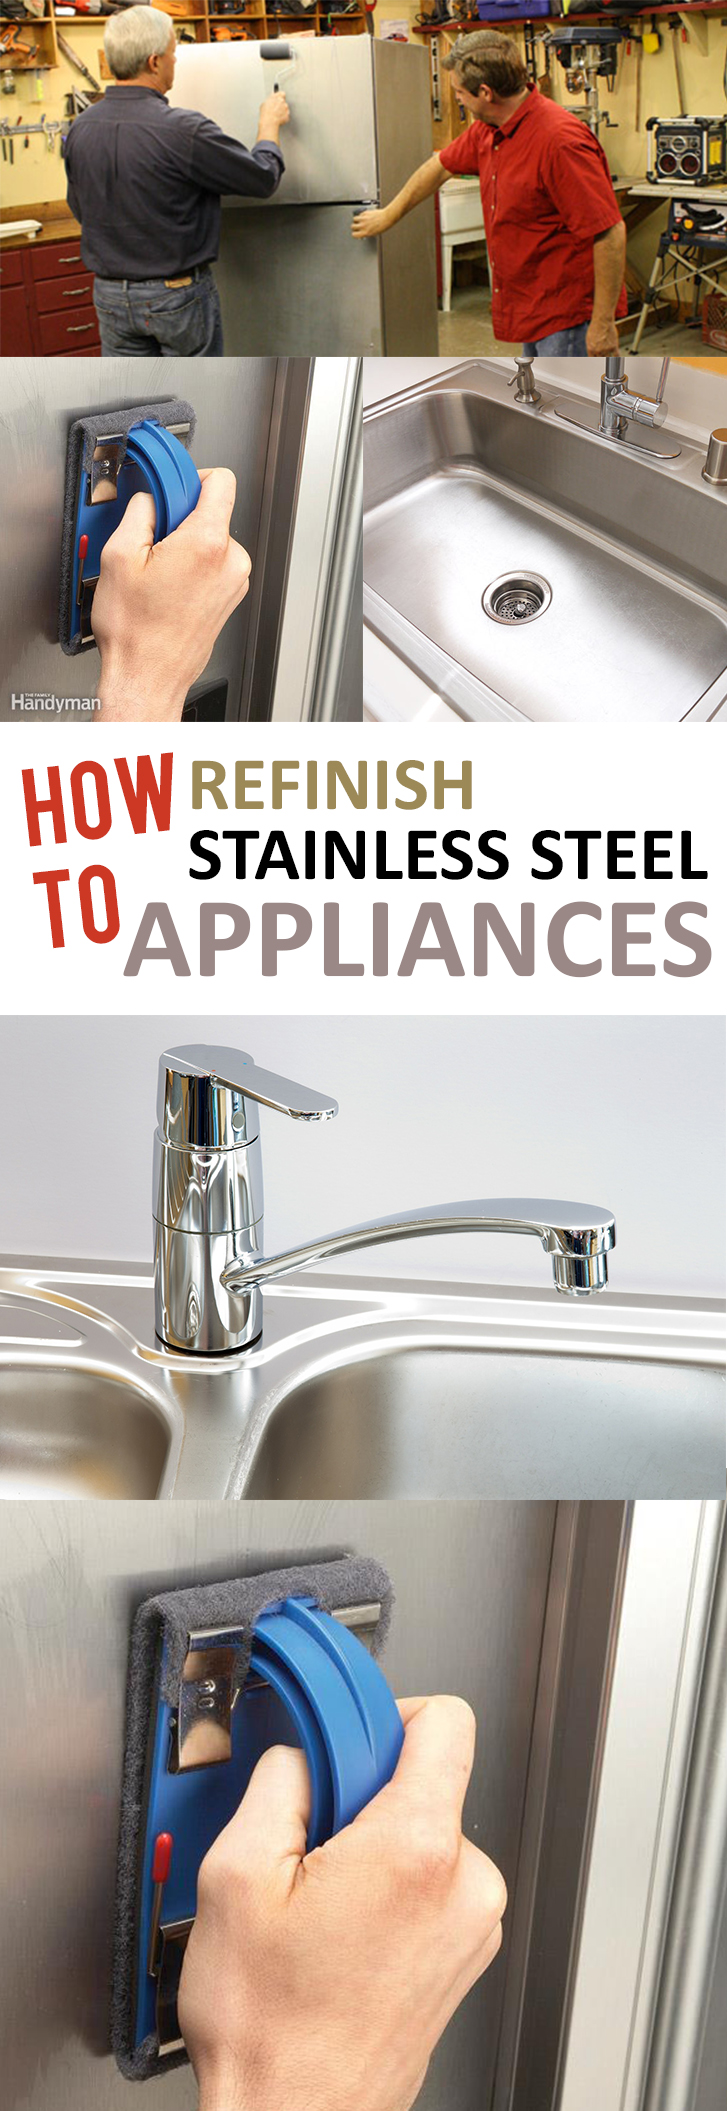 How to Refinish Stainless Steel Appliances